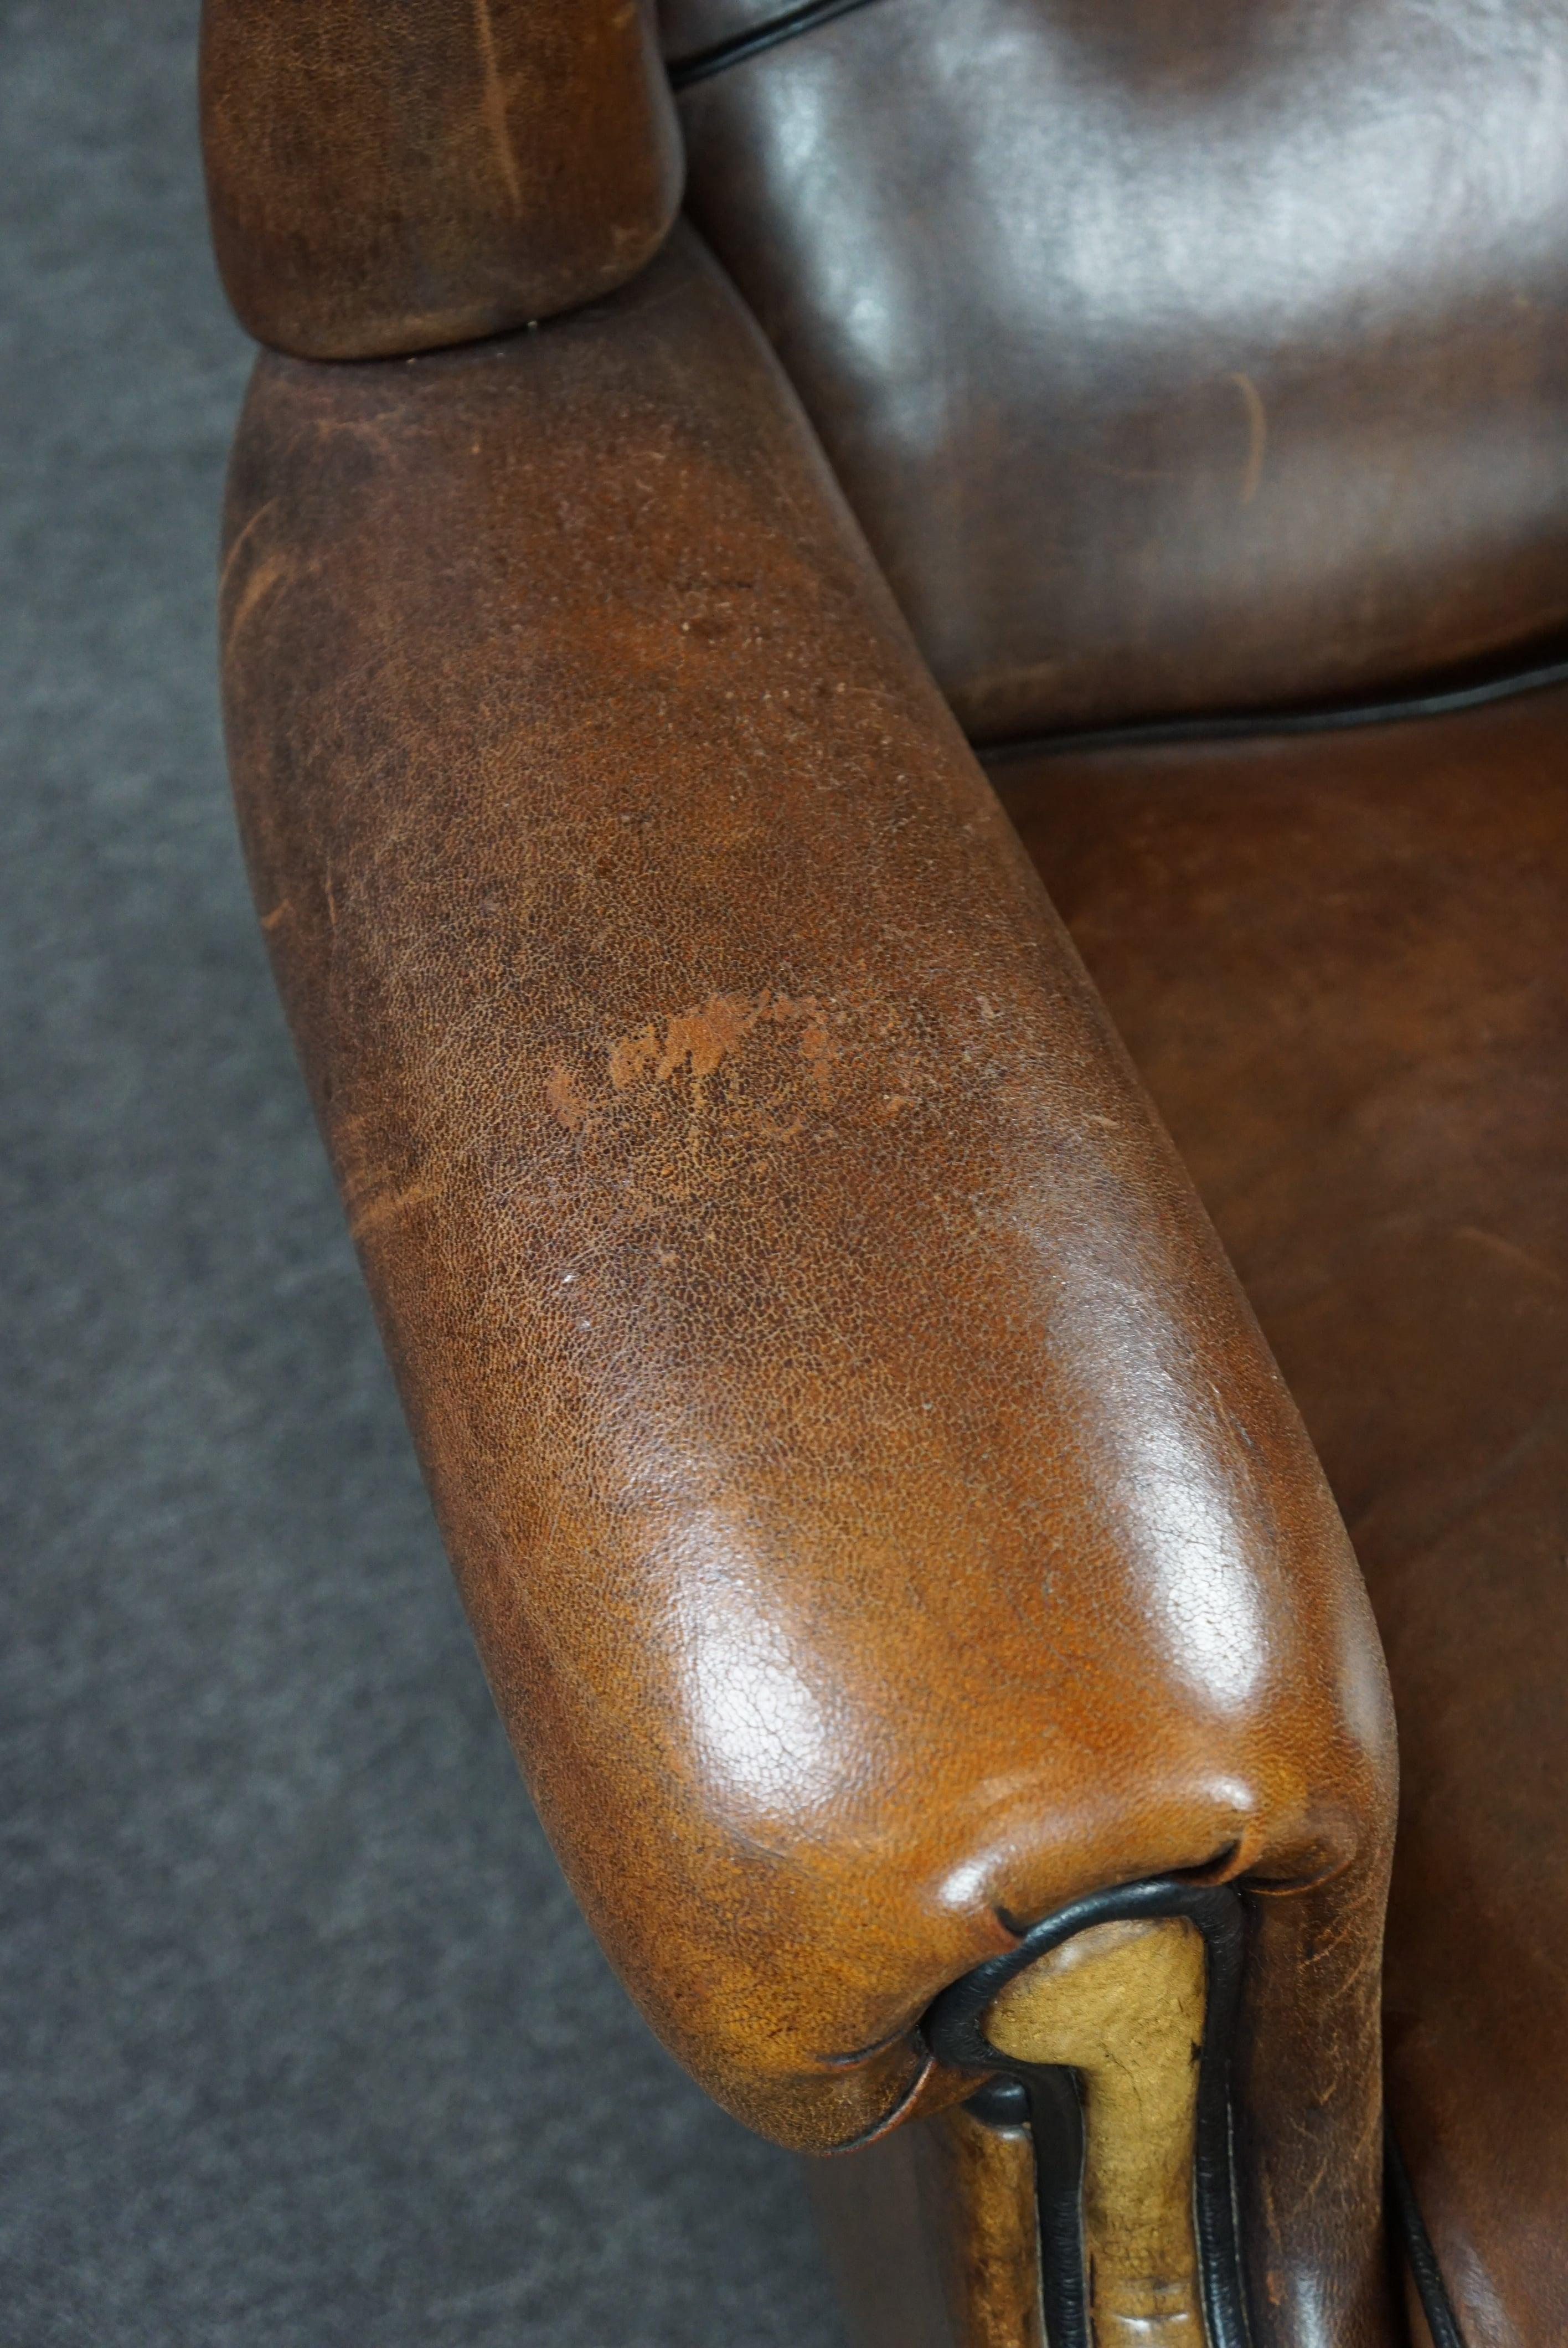 Leather Strikingly colored sheepskin leather wing chair For Sale